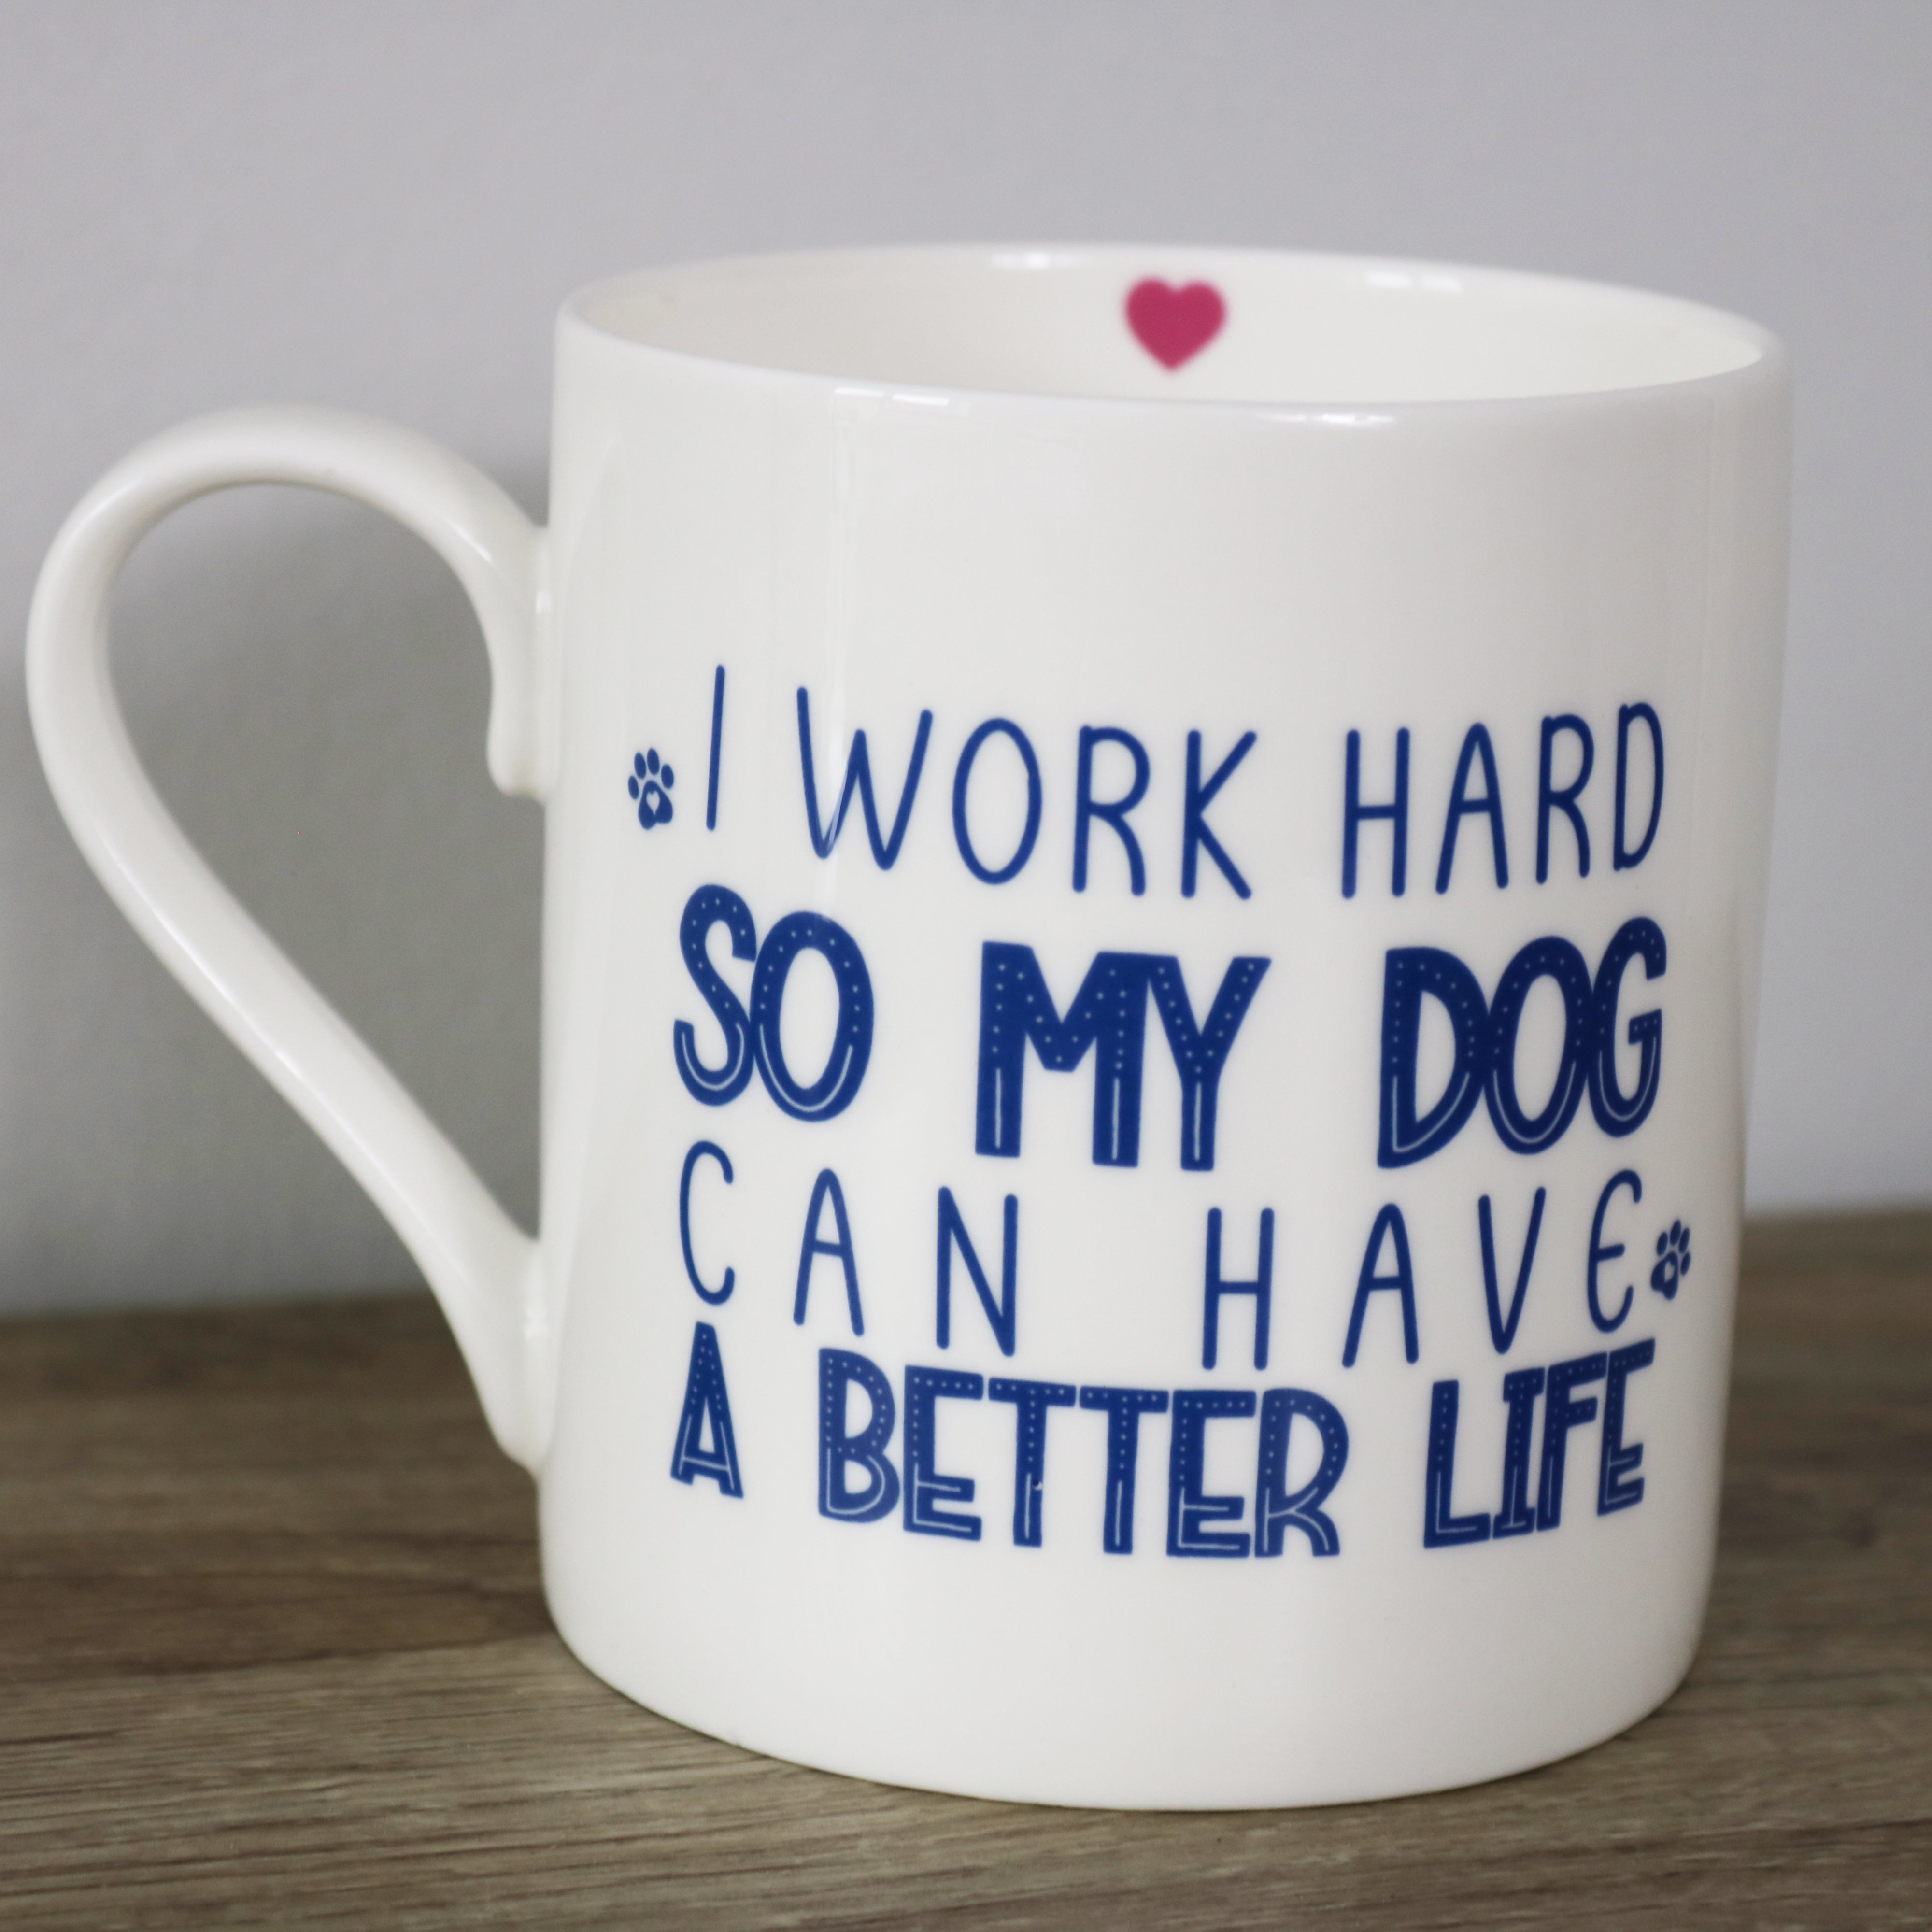 I Work Hard So My Dog Can Have A Better Life